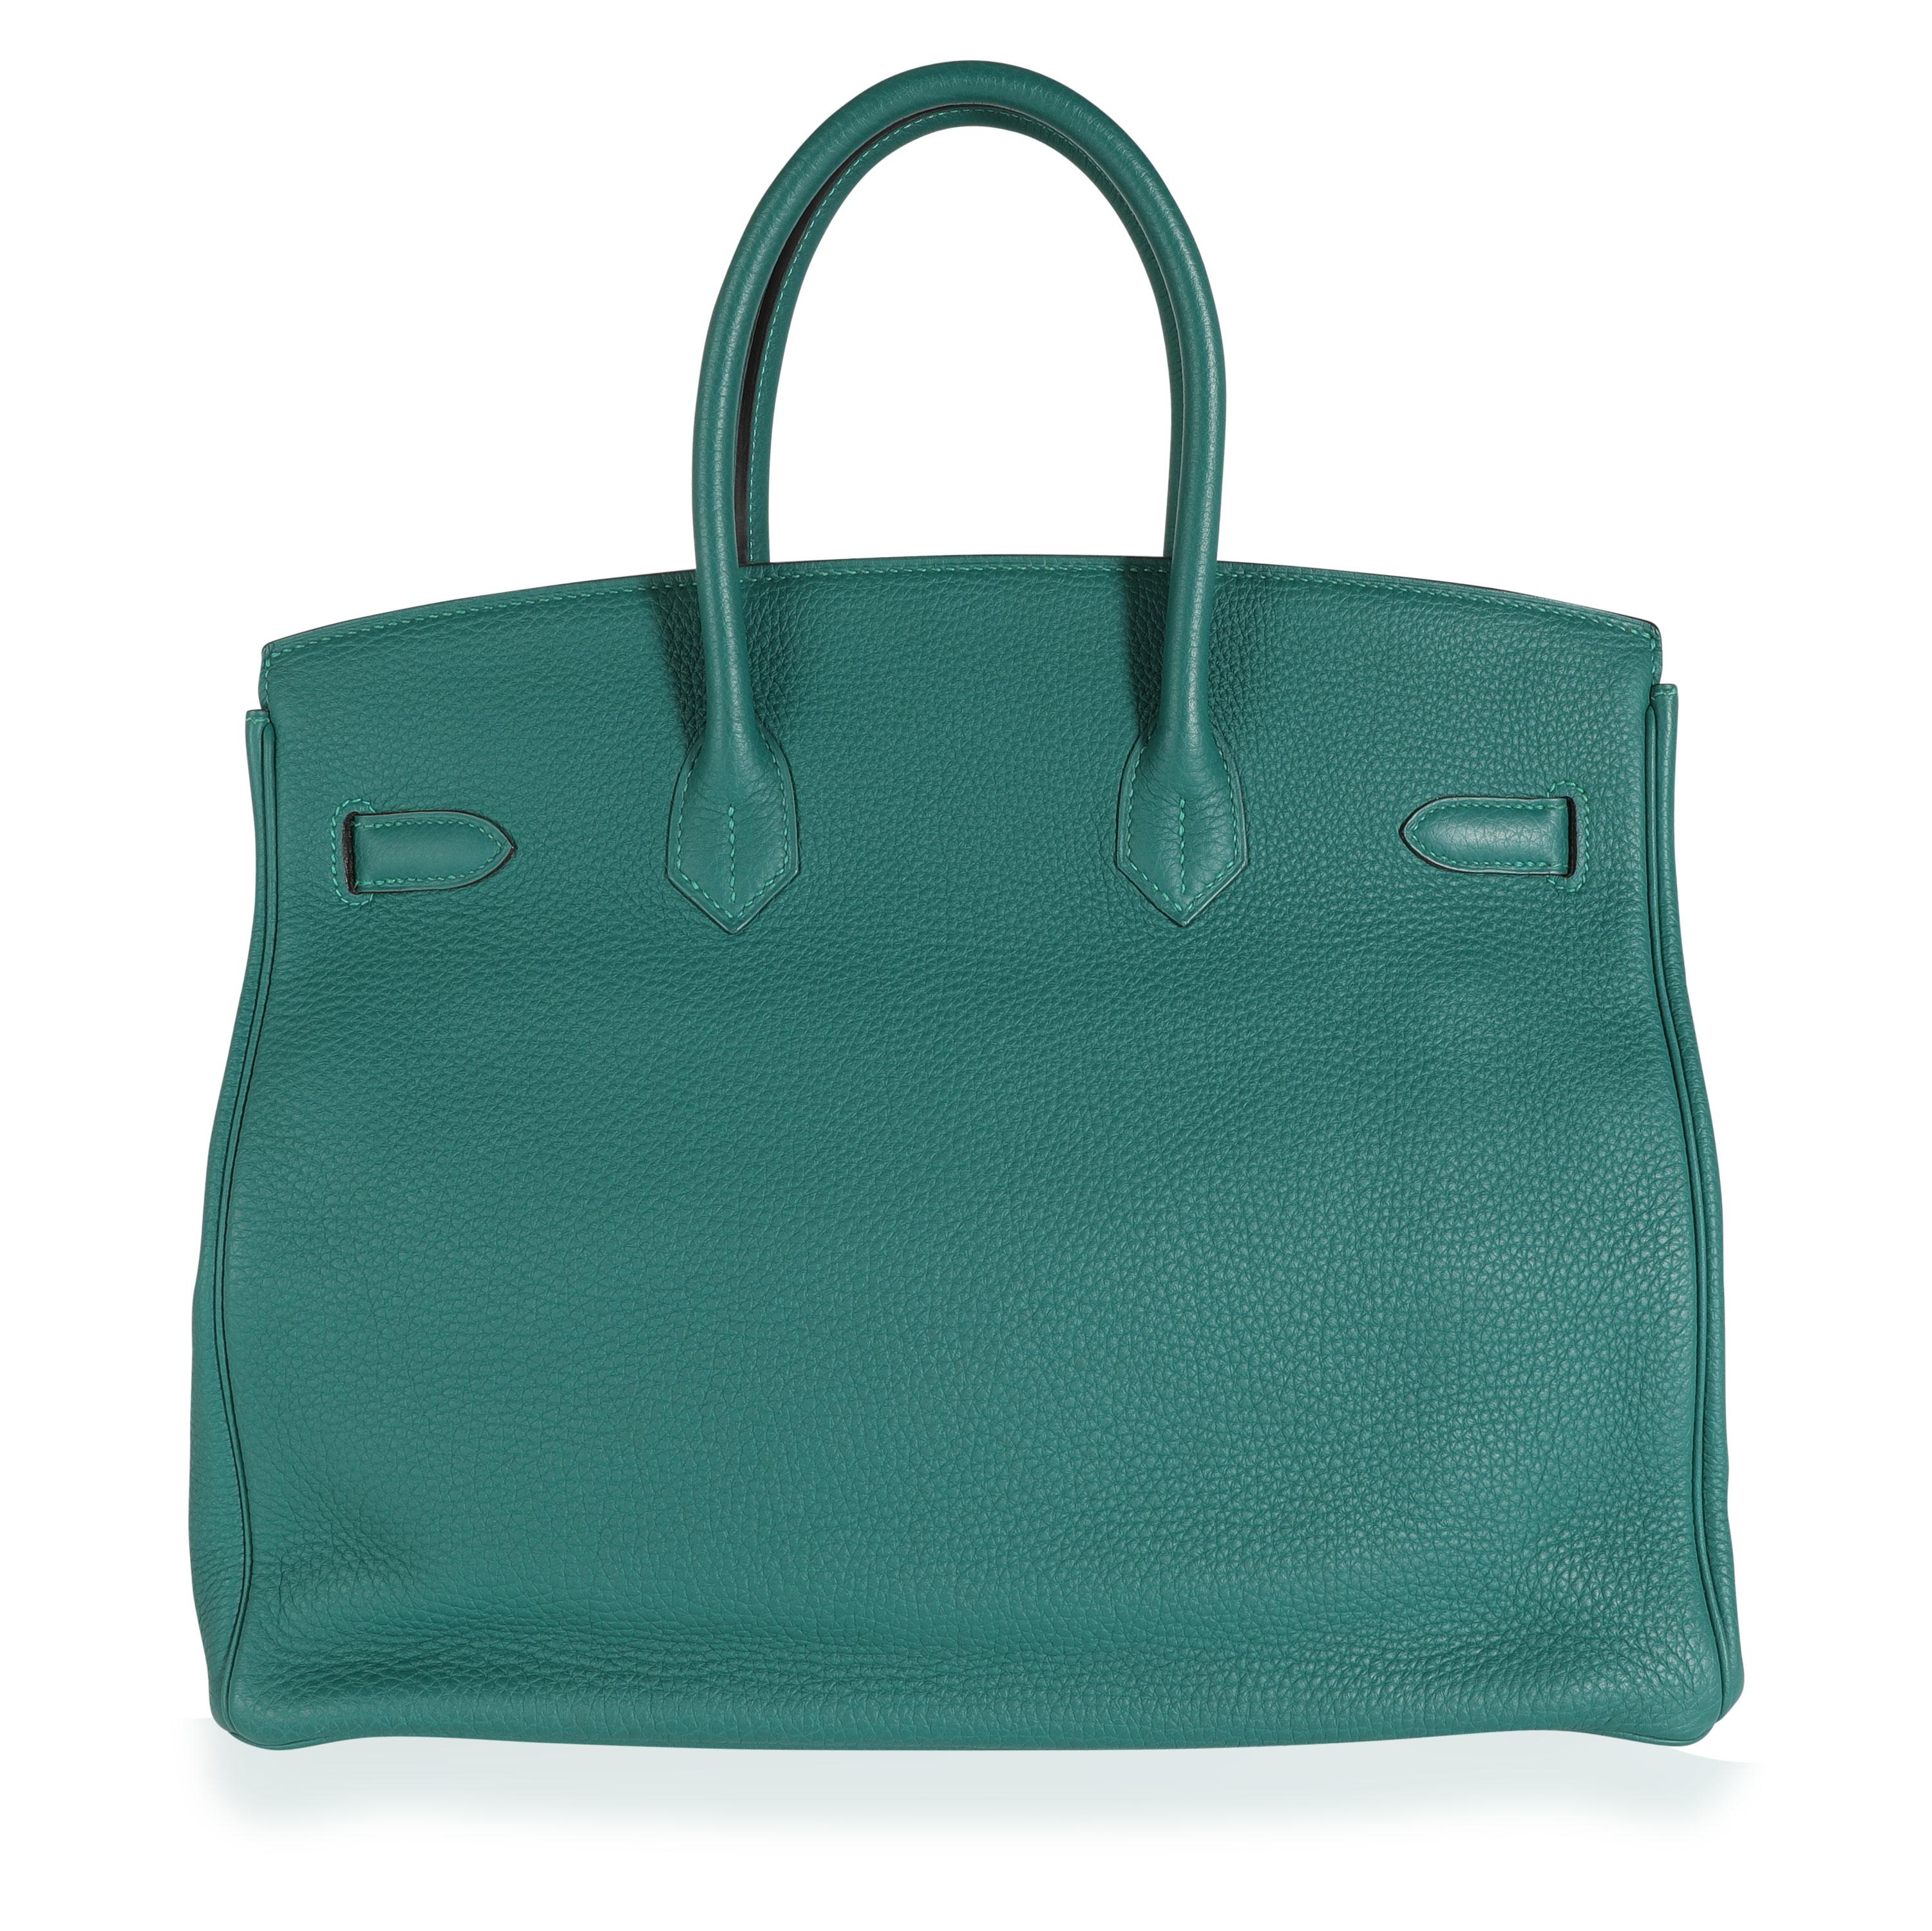 Listing Title: Hermès Malachite Togo Birkin 35 PHW
SKU: 113734
Condition: Pre-owned (3000)
Condition Description: Very Good Condition. Plastic on some hardware. Light scuffing to corners. Scratching to hardware. Scuffing to interior.
Handbag